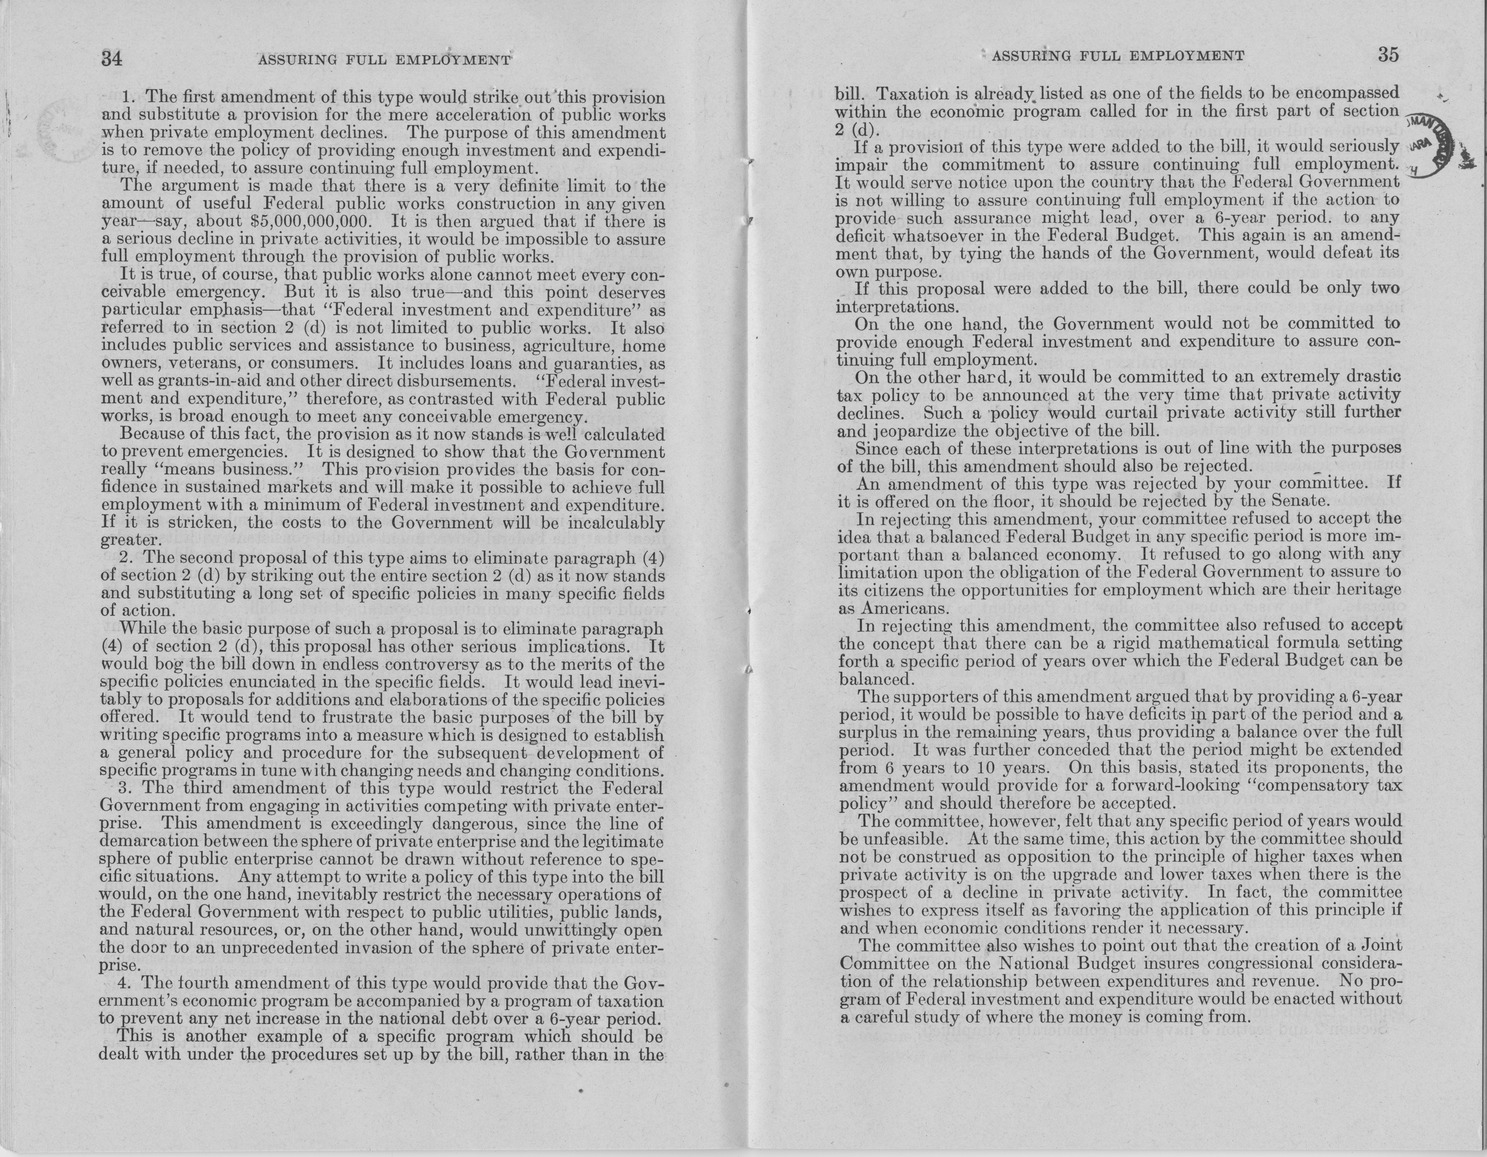 Memorandum from Harold D. Smith to M. C. Latta, S. 380, To Declare a National Policy on Employment, Production, and Purchasing Power, and for Other Purposes, with Attachments